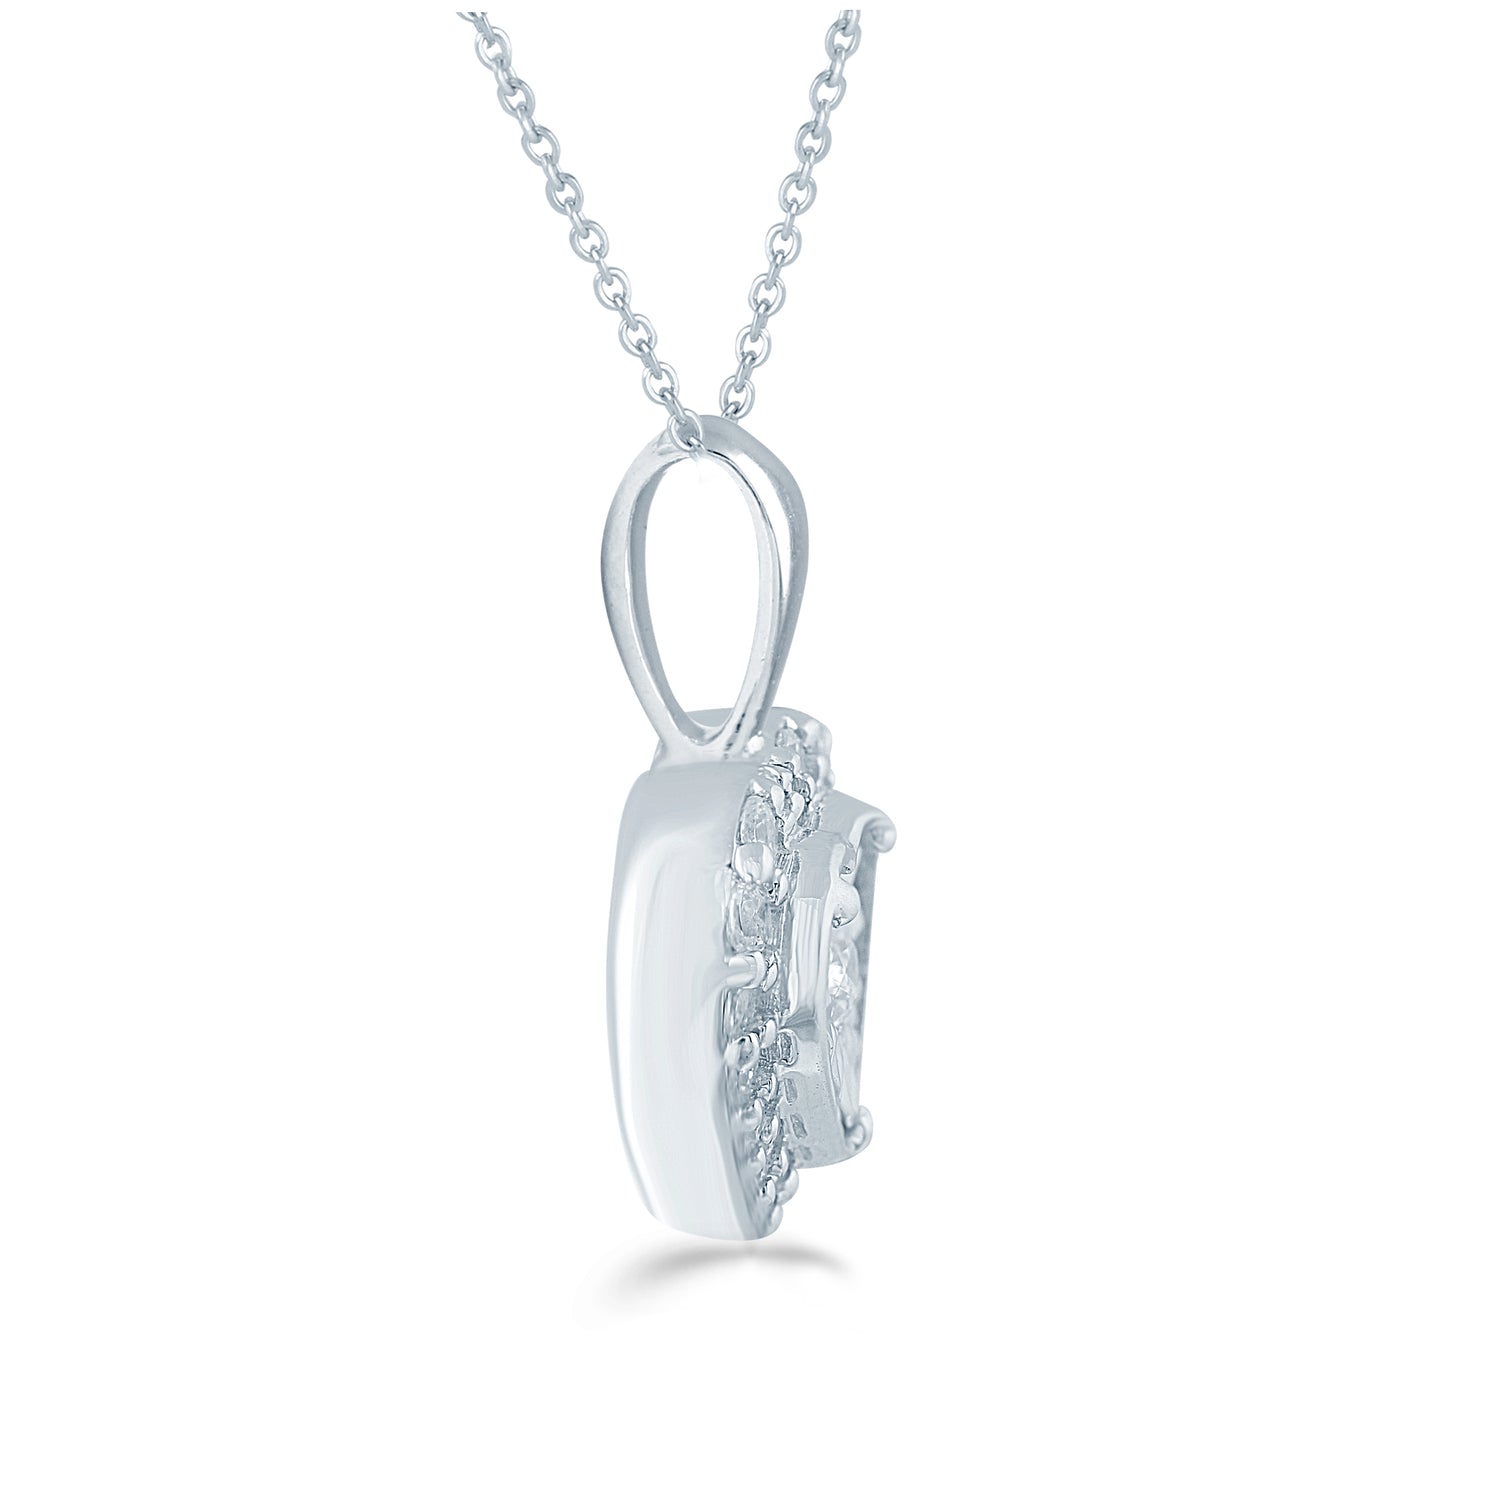 1/8CT TW Diamond Heart Shaped Pendant in  Sterling Silver with 18 inch cable chain